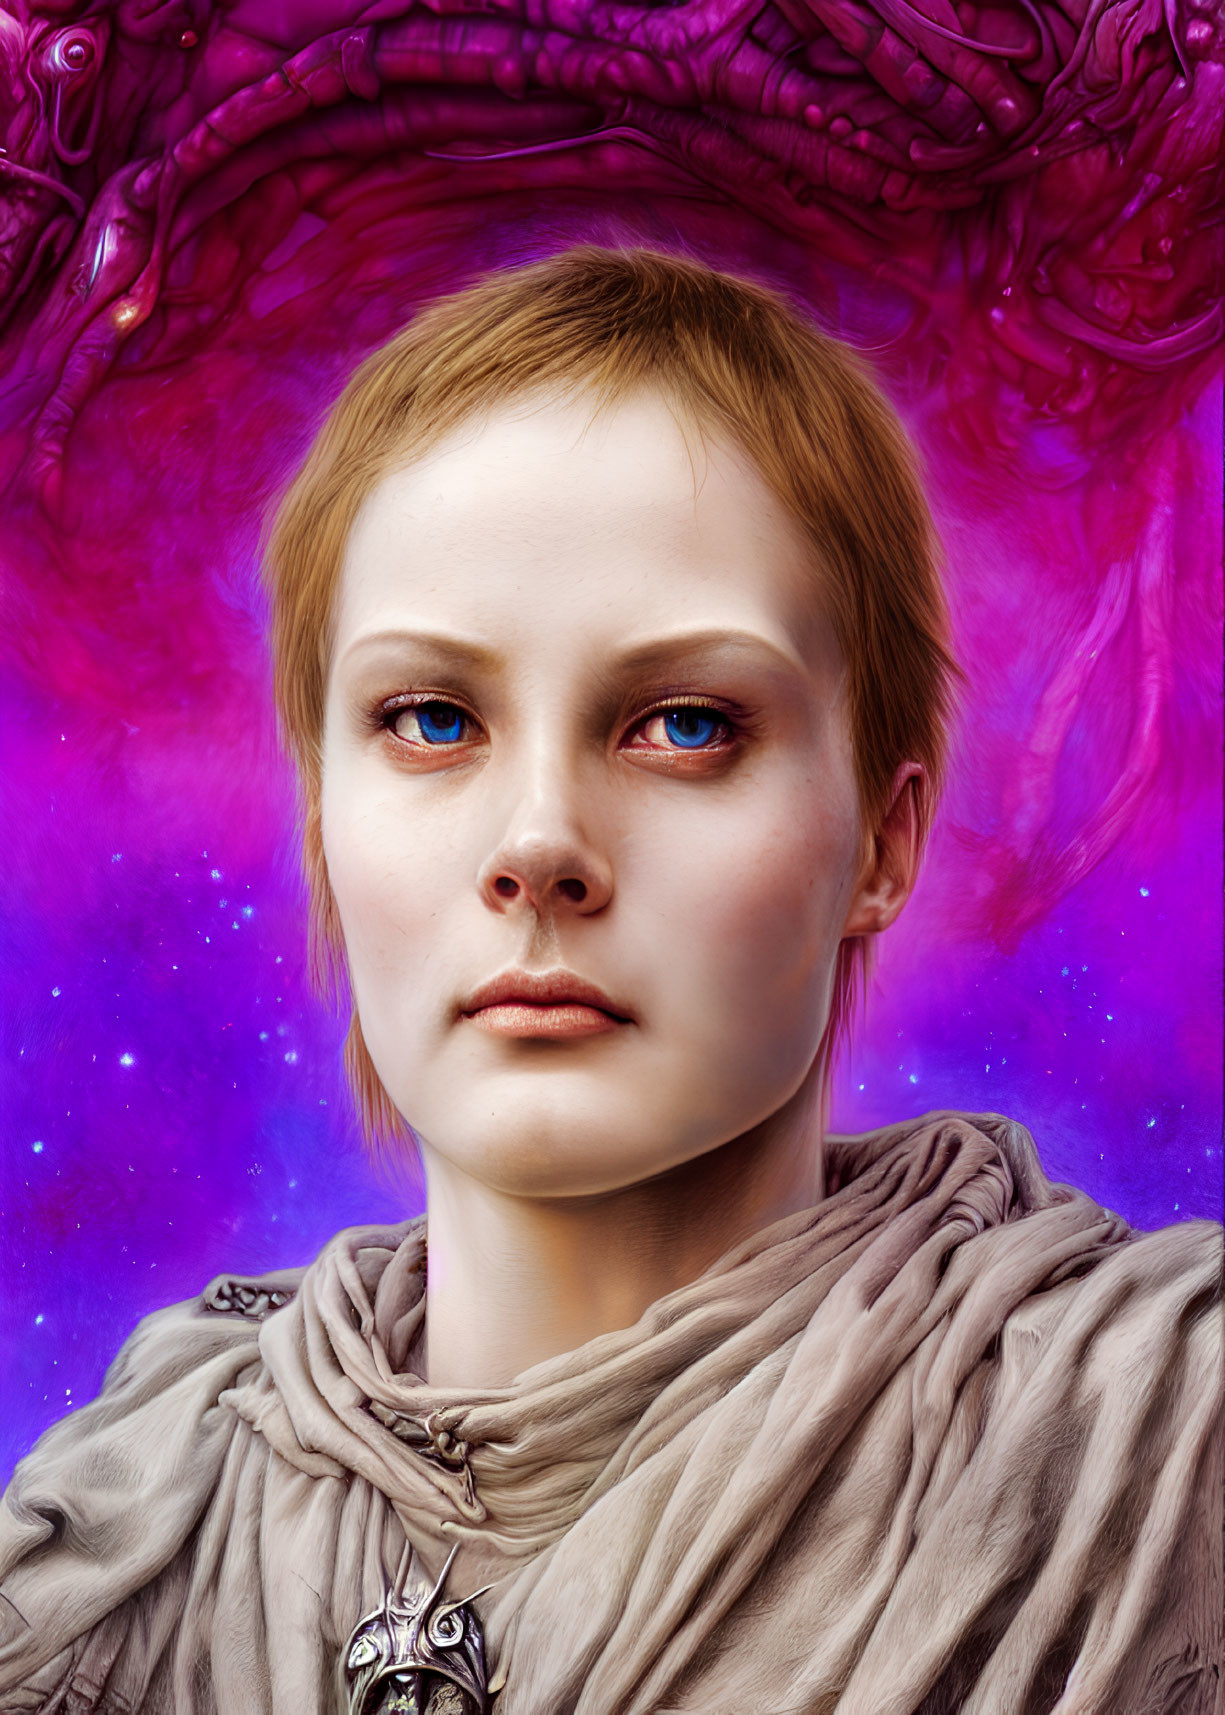 Woman with Blue Eyes and Blonde Hair in Cosmic Purple Setting